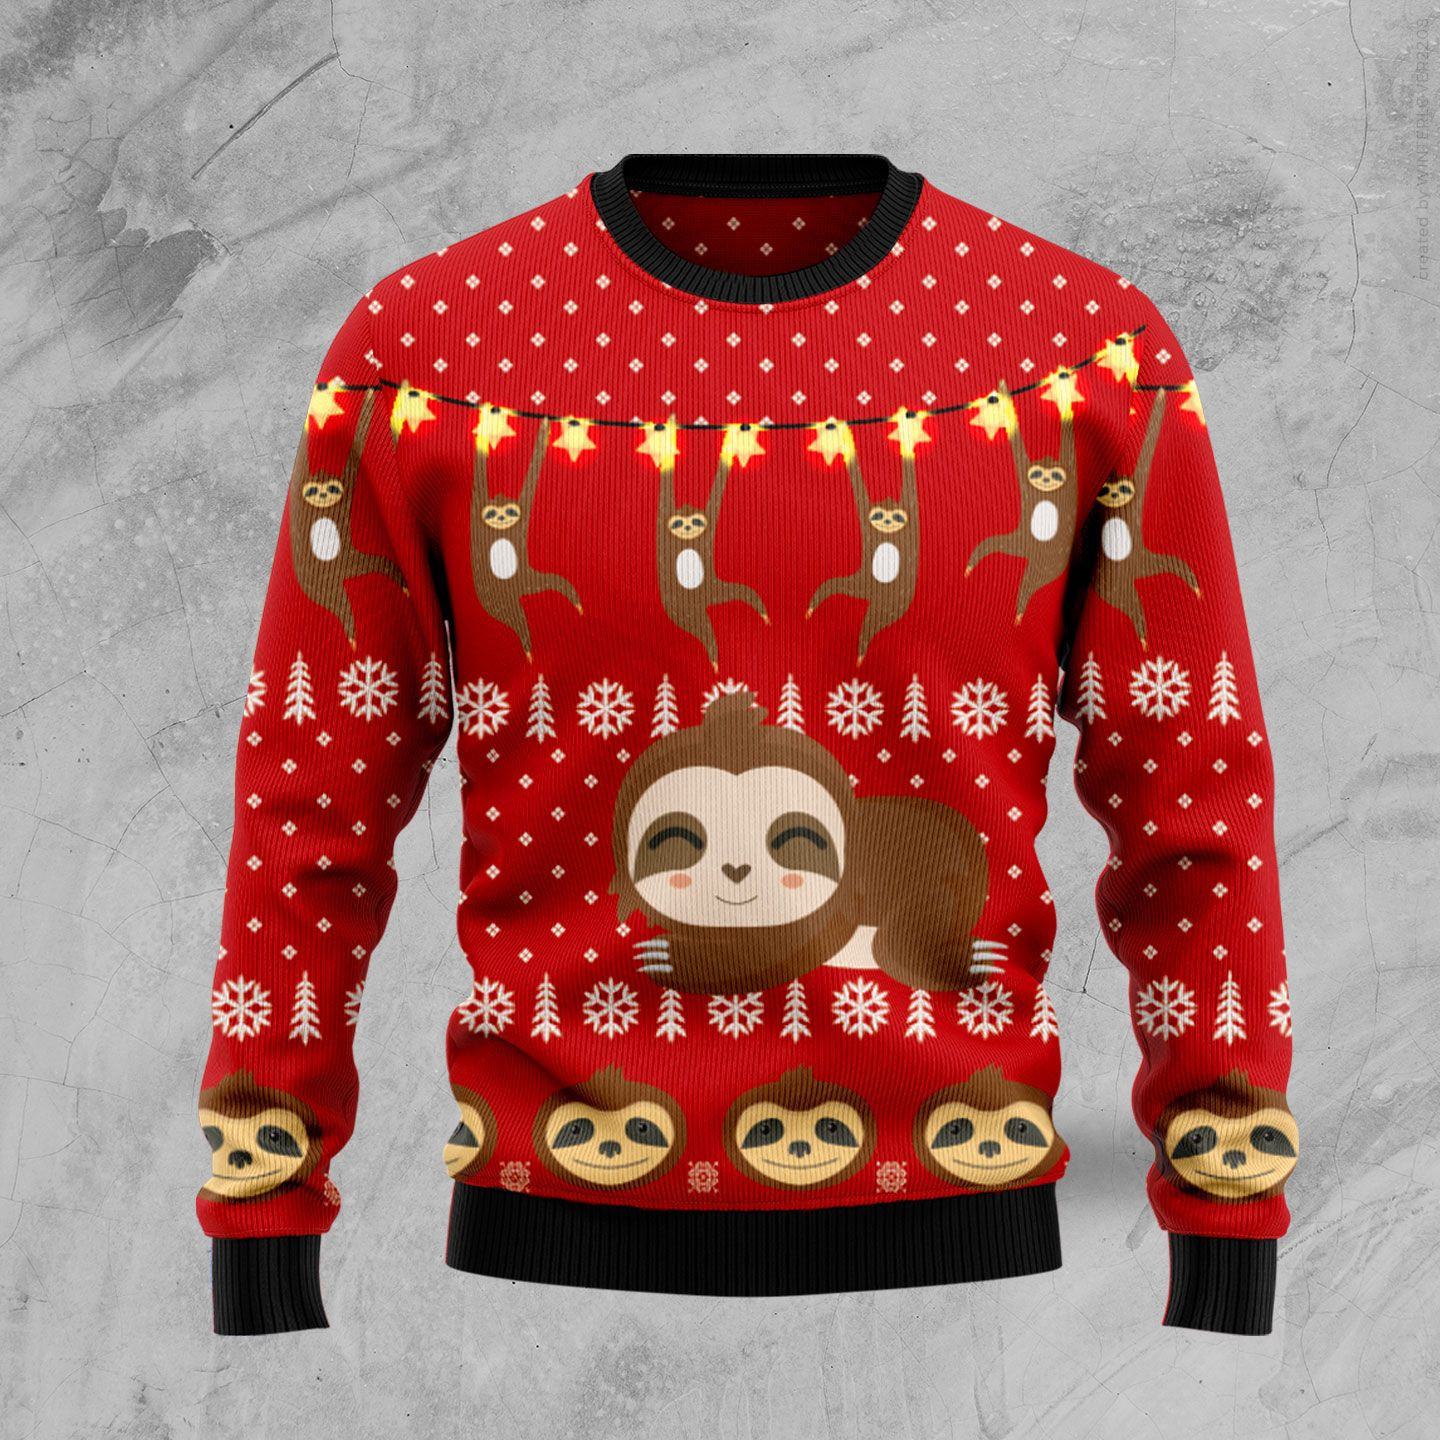 Sloth Lover Ugly Christmas Sweater Ugly Sweater For Men Women